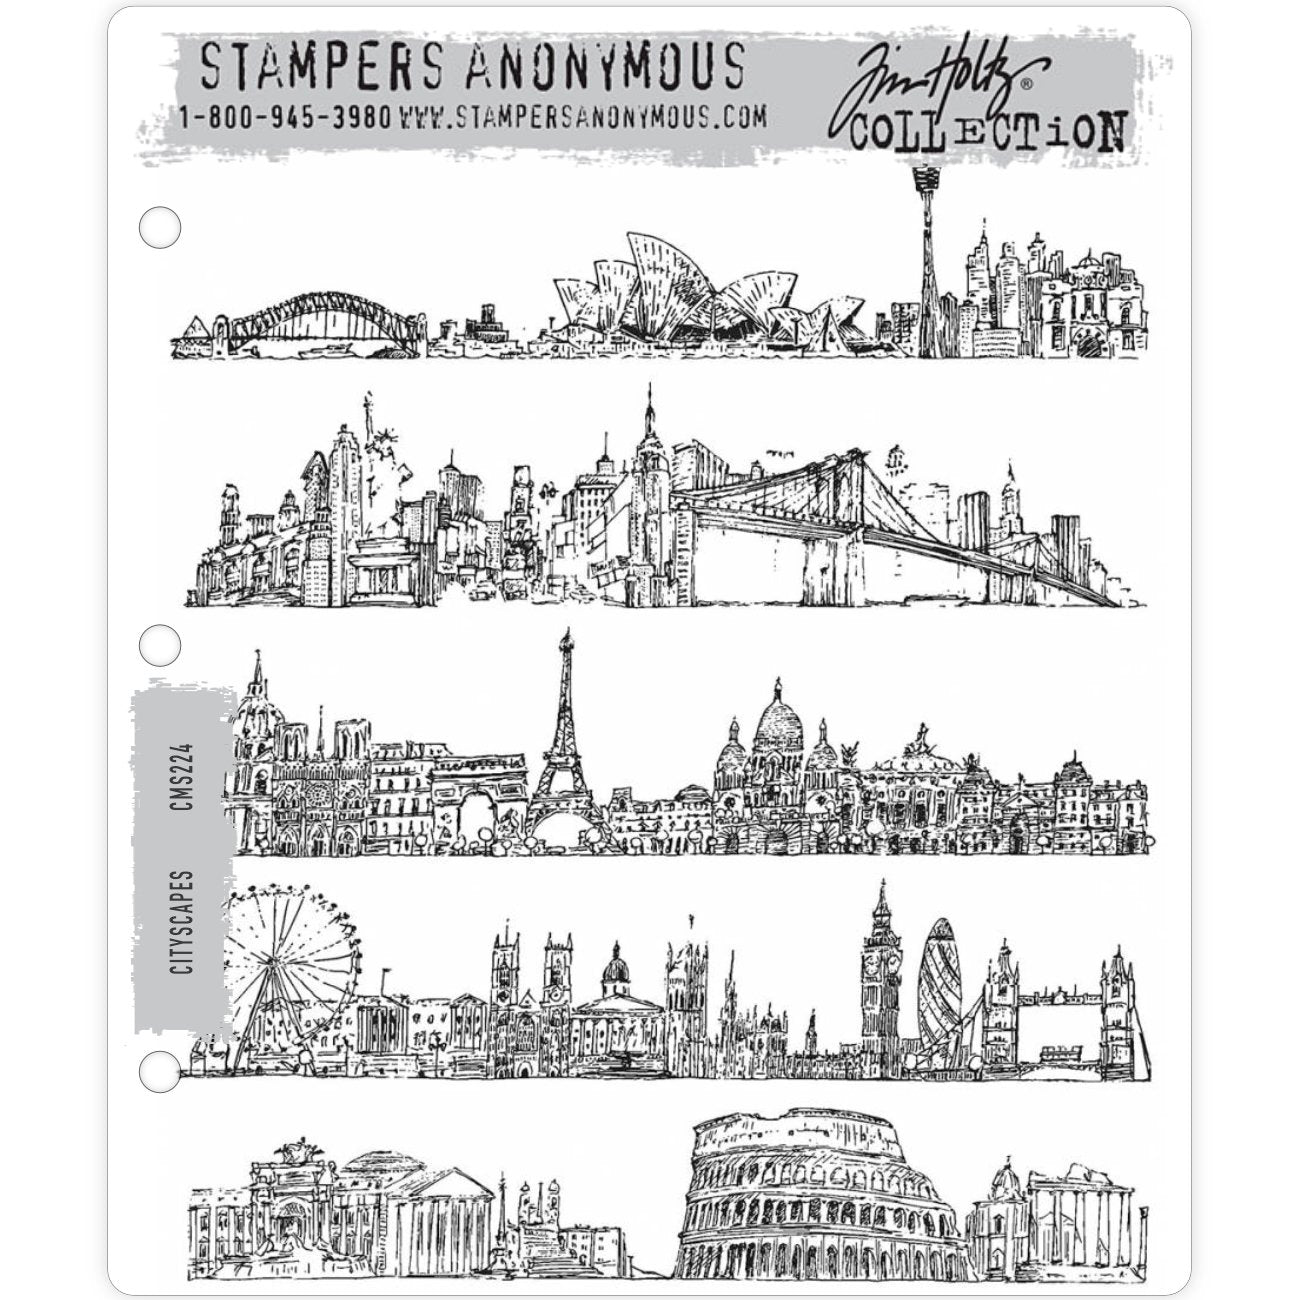 Cityscapes ... 5 (five) rubber stamps by Tim Holtz (CMS224) - cities of our world.  A set of detailed illustrations featuring 5 popular cities from all around the world. Places include Sydney in Australia; Paris, France; London, England UK; New York, USA; Rome in Italy.  Sizes (approx) : each landscape is 1 1/2" deep x 6 3/8" wide.